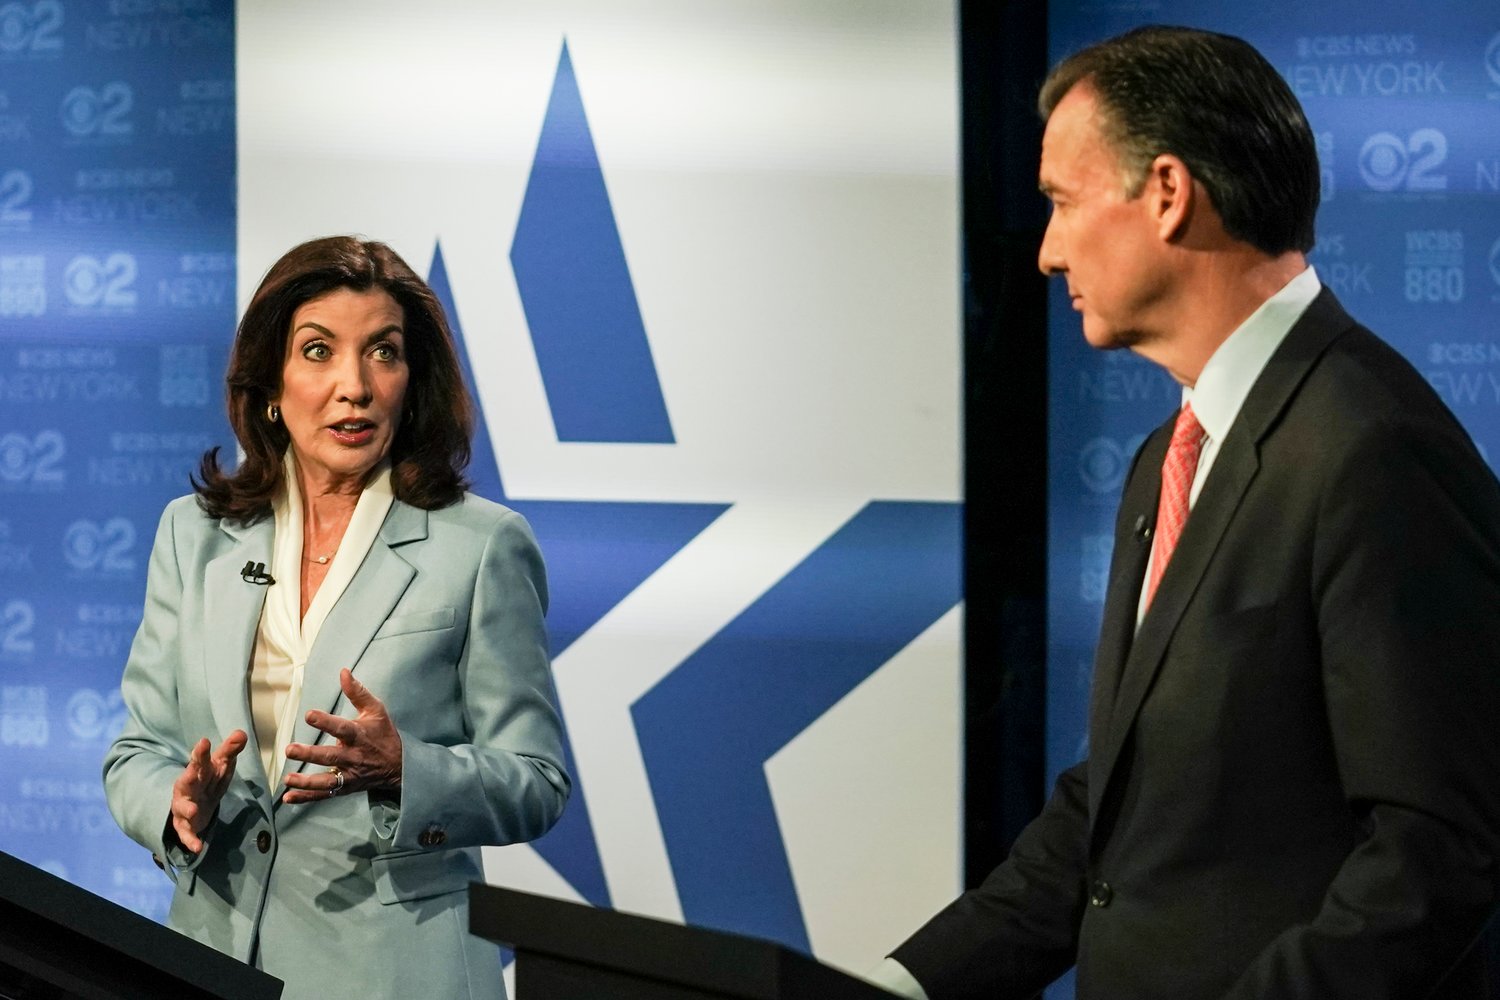 New York Governor Kathy Hochul, left, talks with Congressman Tom Suozzi, D-N.Y, before the New York's governor primary debate at the studios of WCBS2-TV,  Tuesday, June 7, 2022, in New York. (AP Photo/Bebeto Matthews)